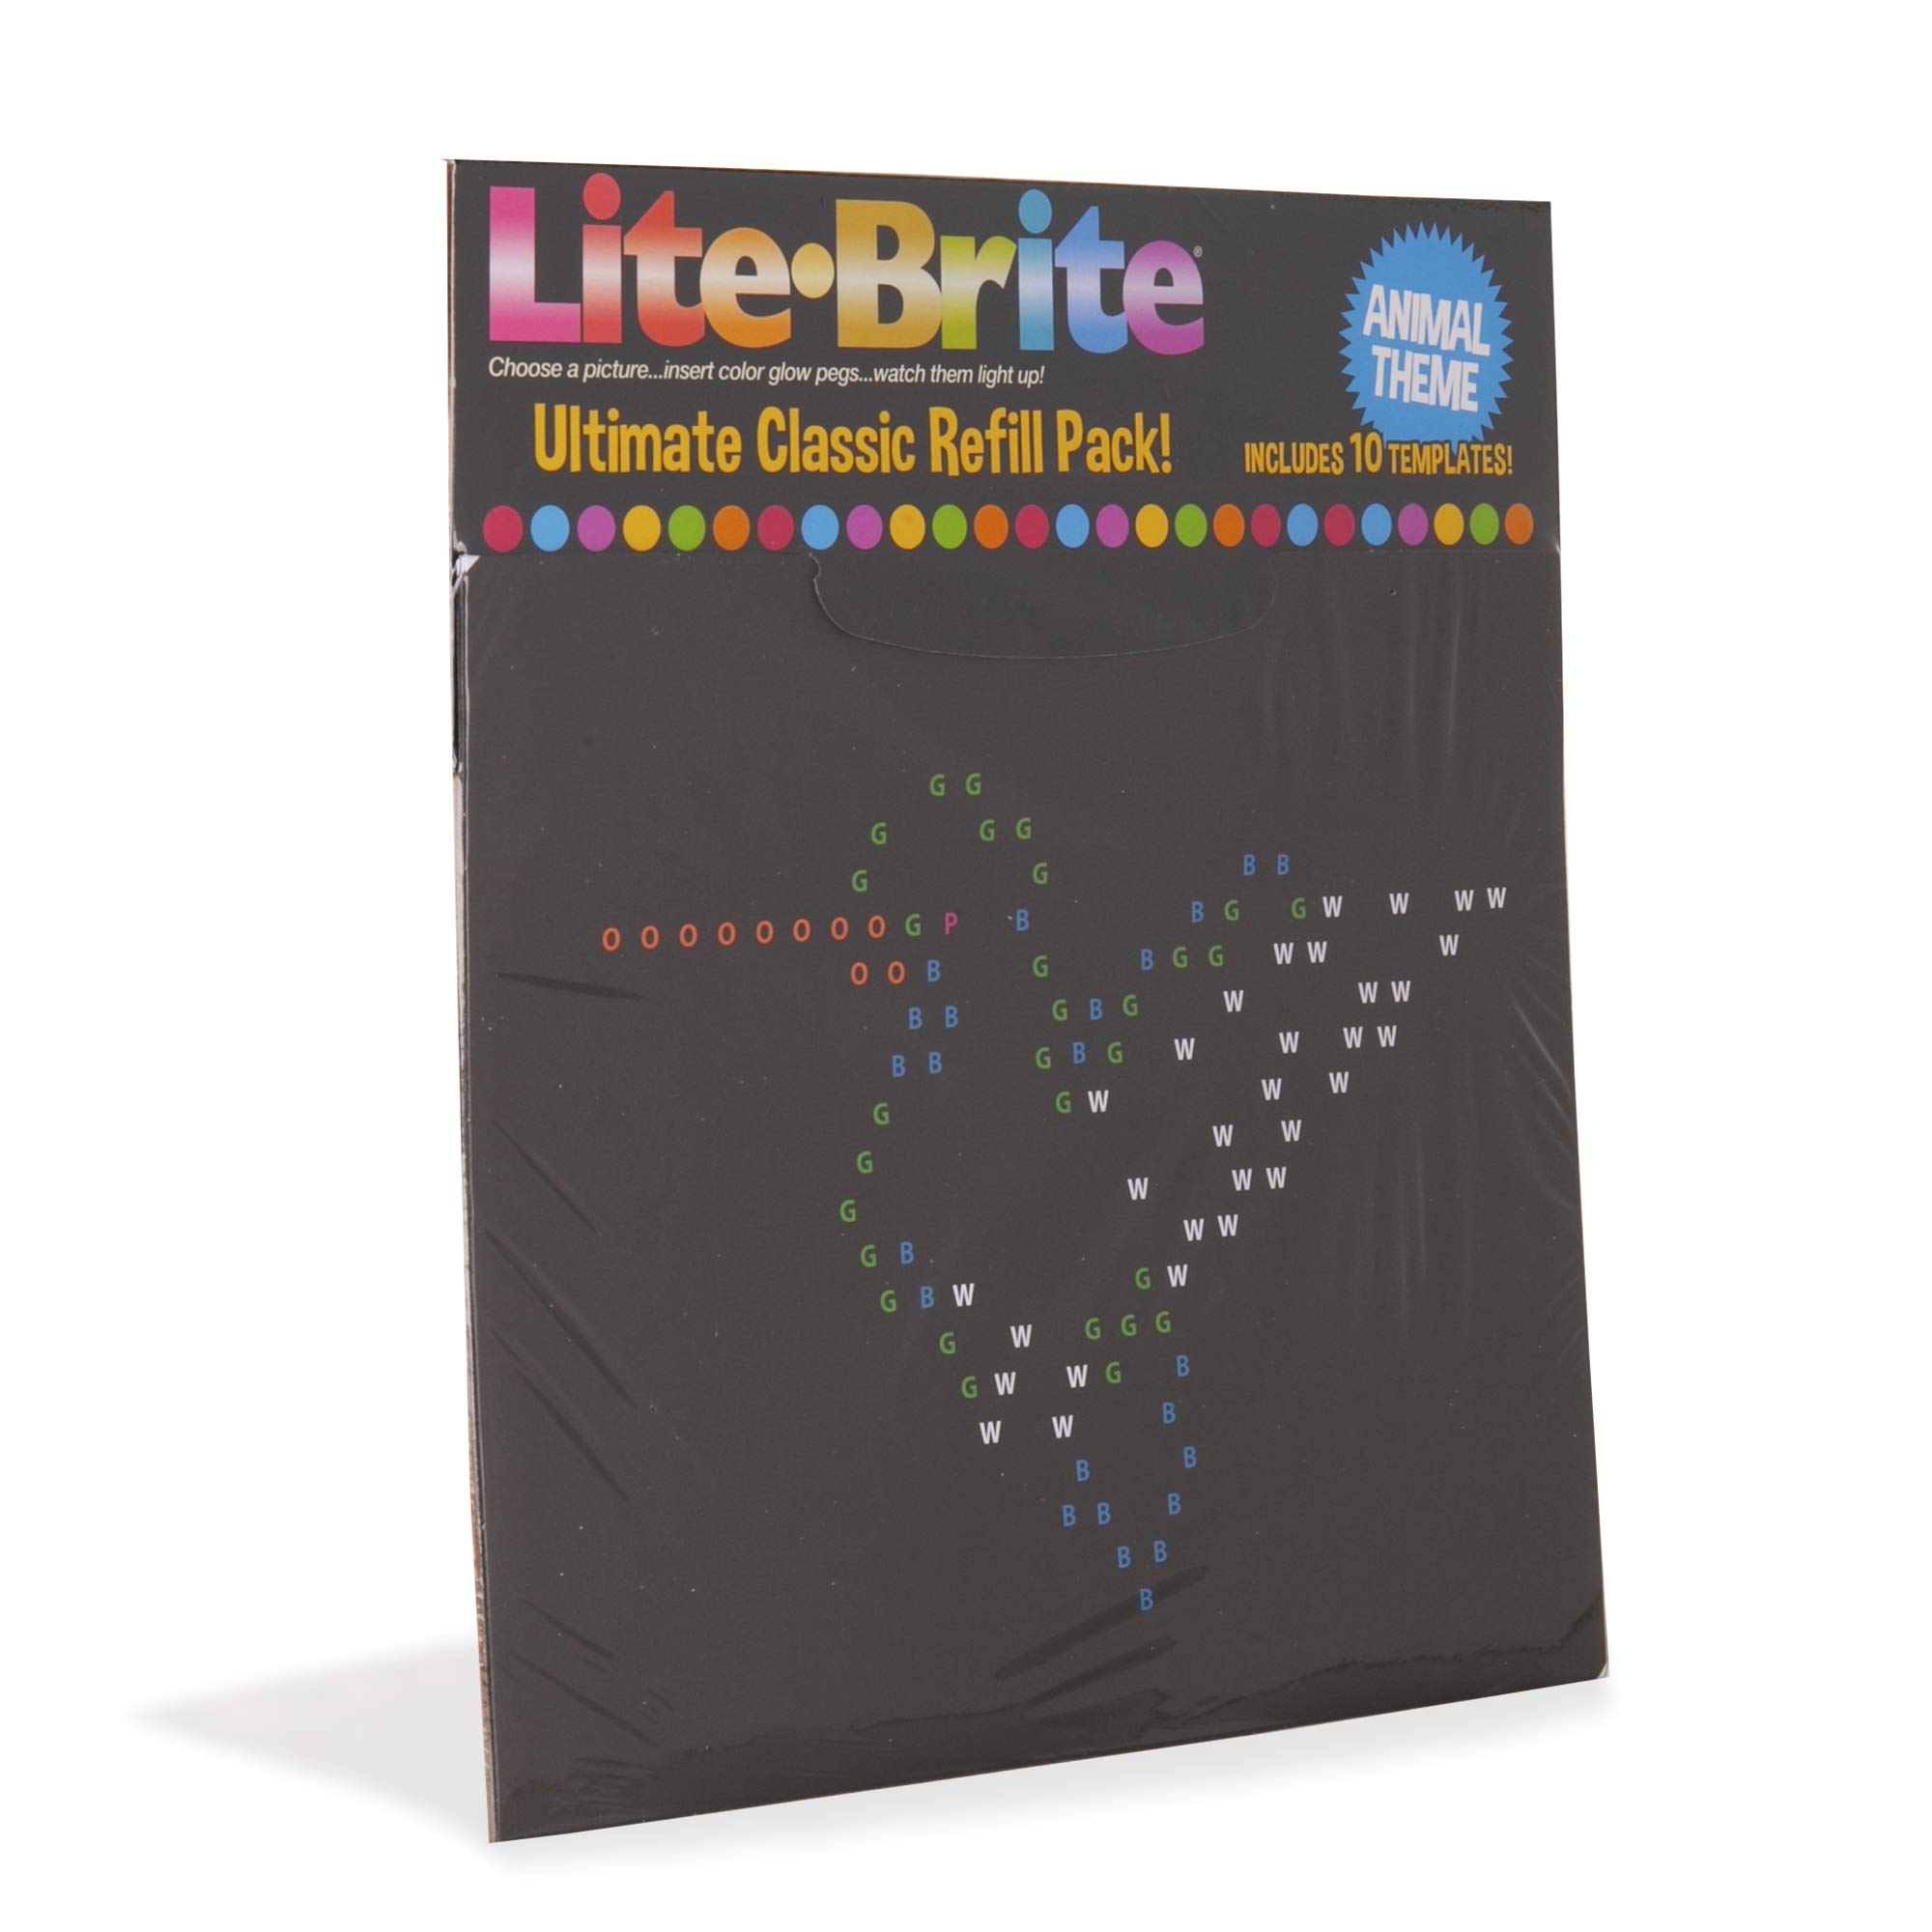 Lite Brite Ultimate Classic Refill Pack - Animal Theme - 10 Reusable Templates - Amazon Exclusive , Black, for ages 4 - 15 years